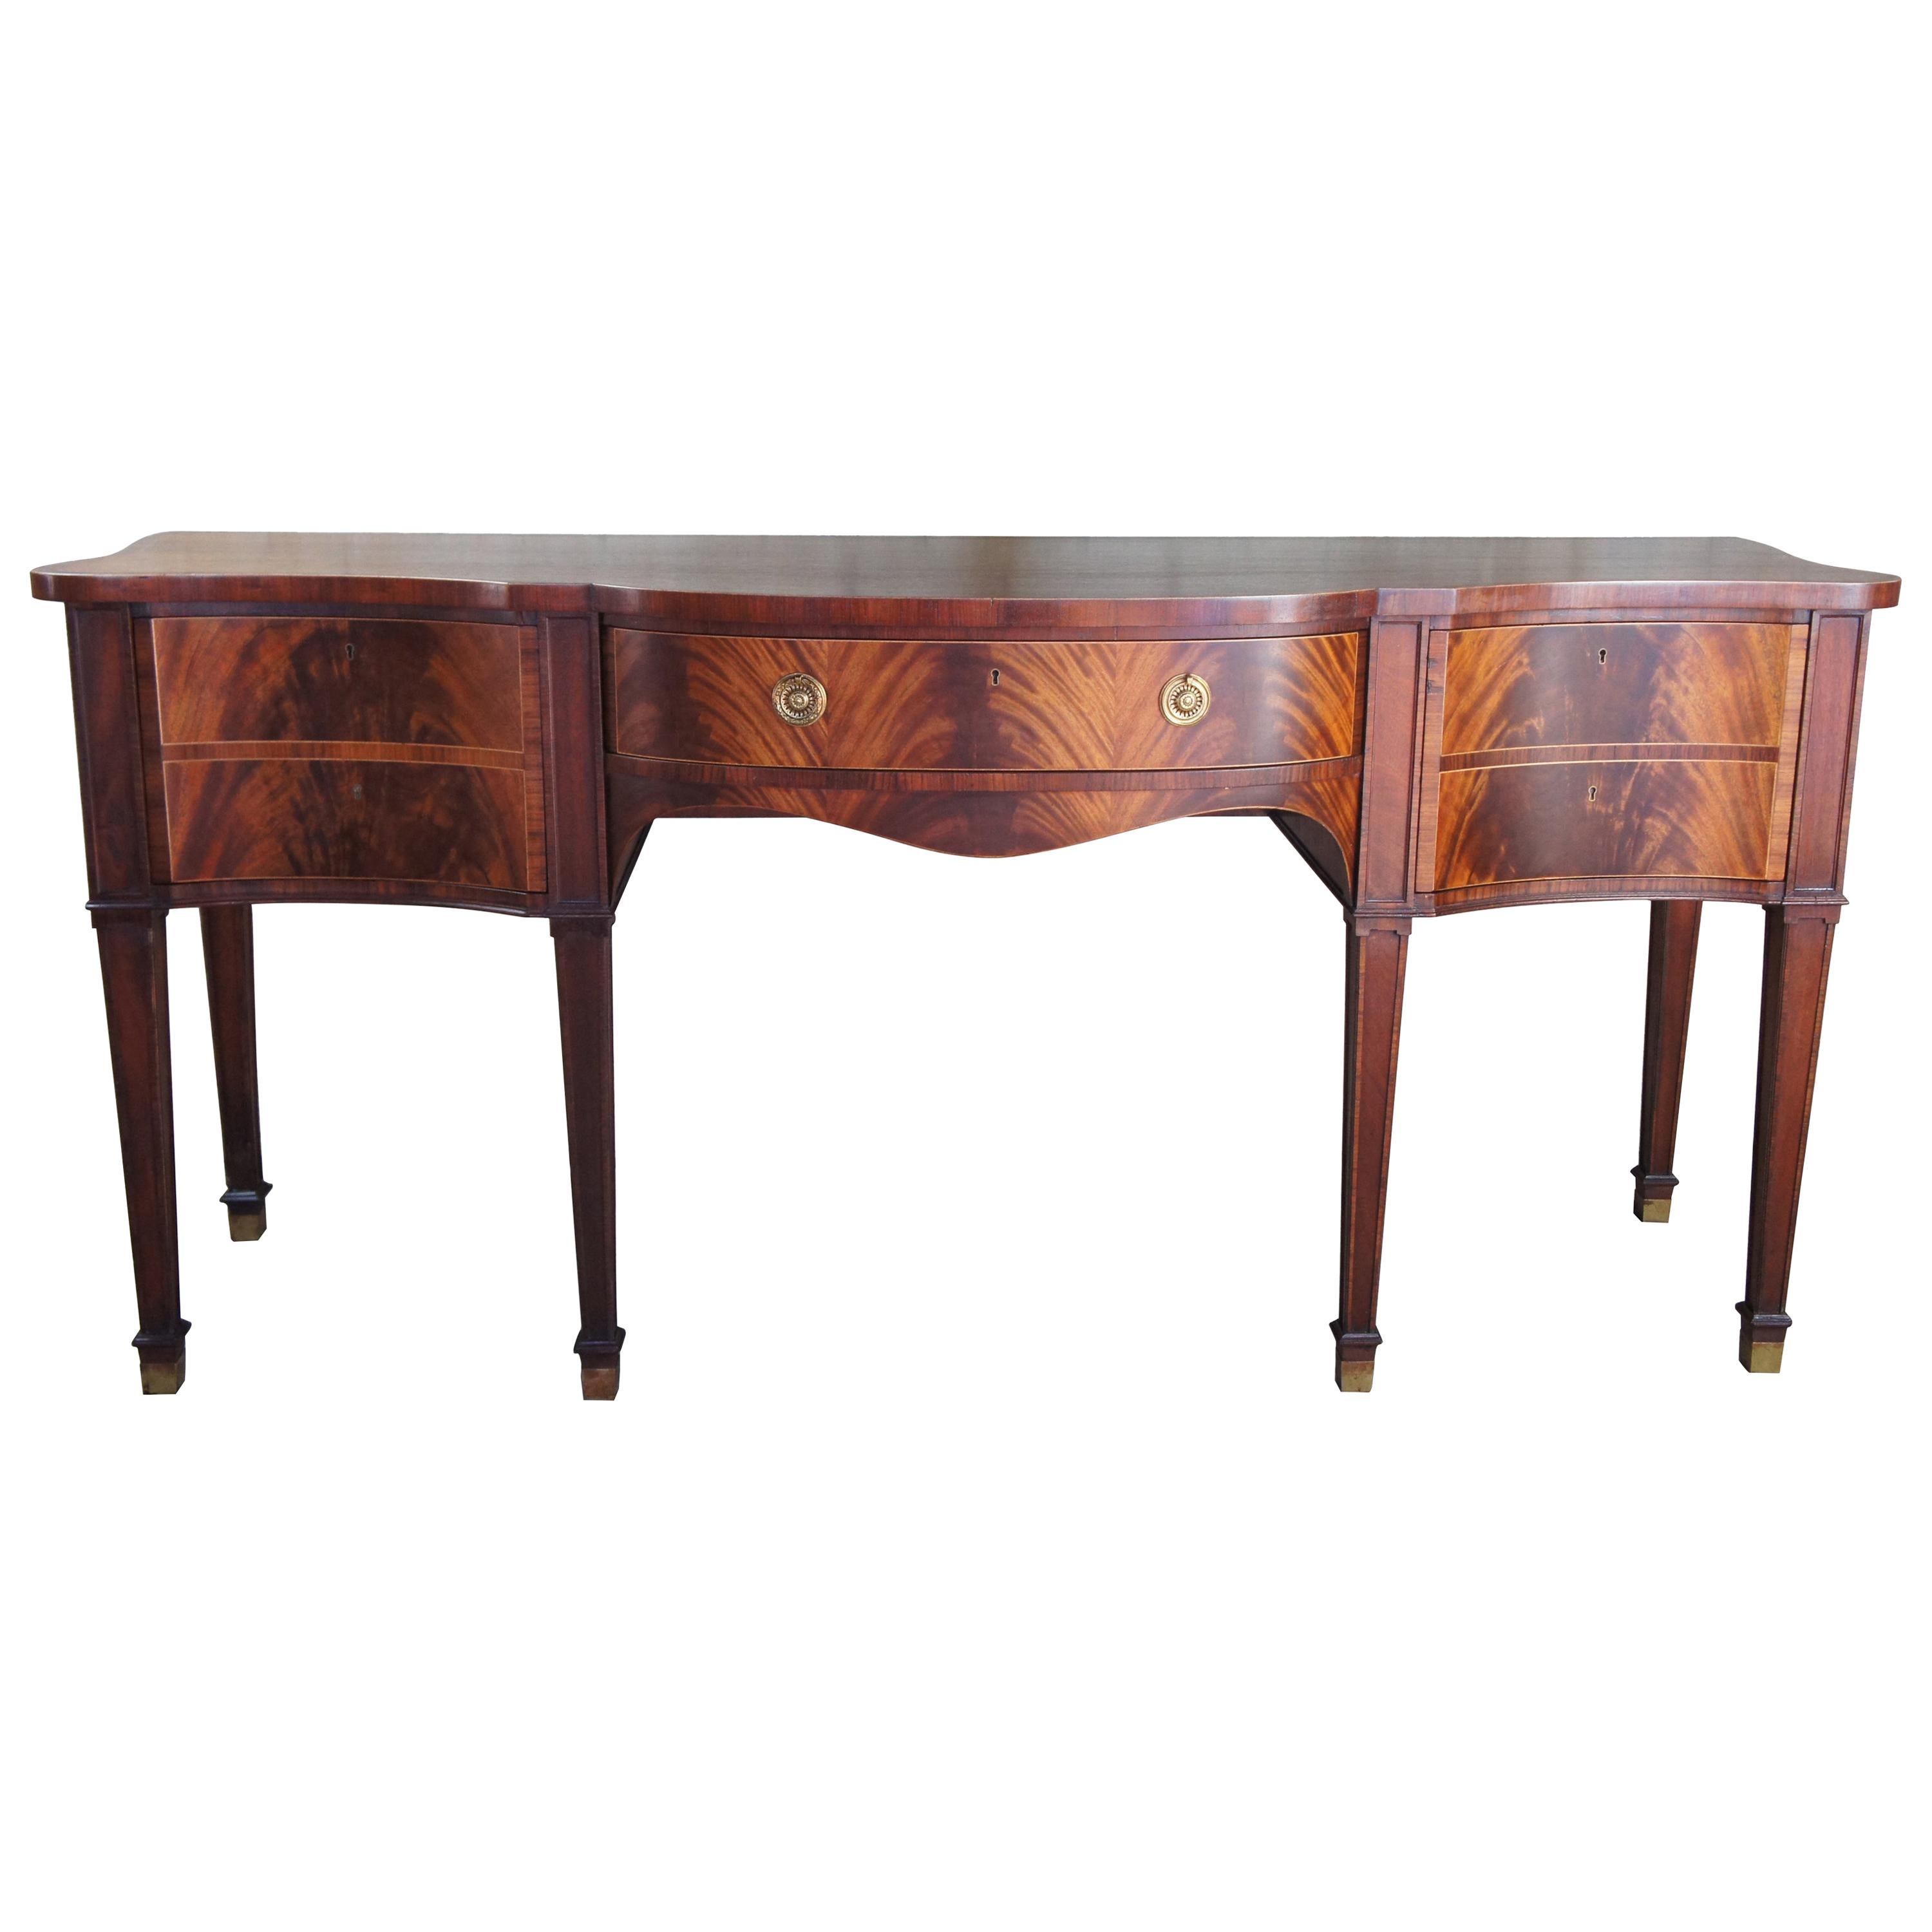 Baker Stately Homes Flamed Mahogany Sideboard Serpentine Buffet Sheraton Style